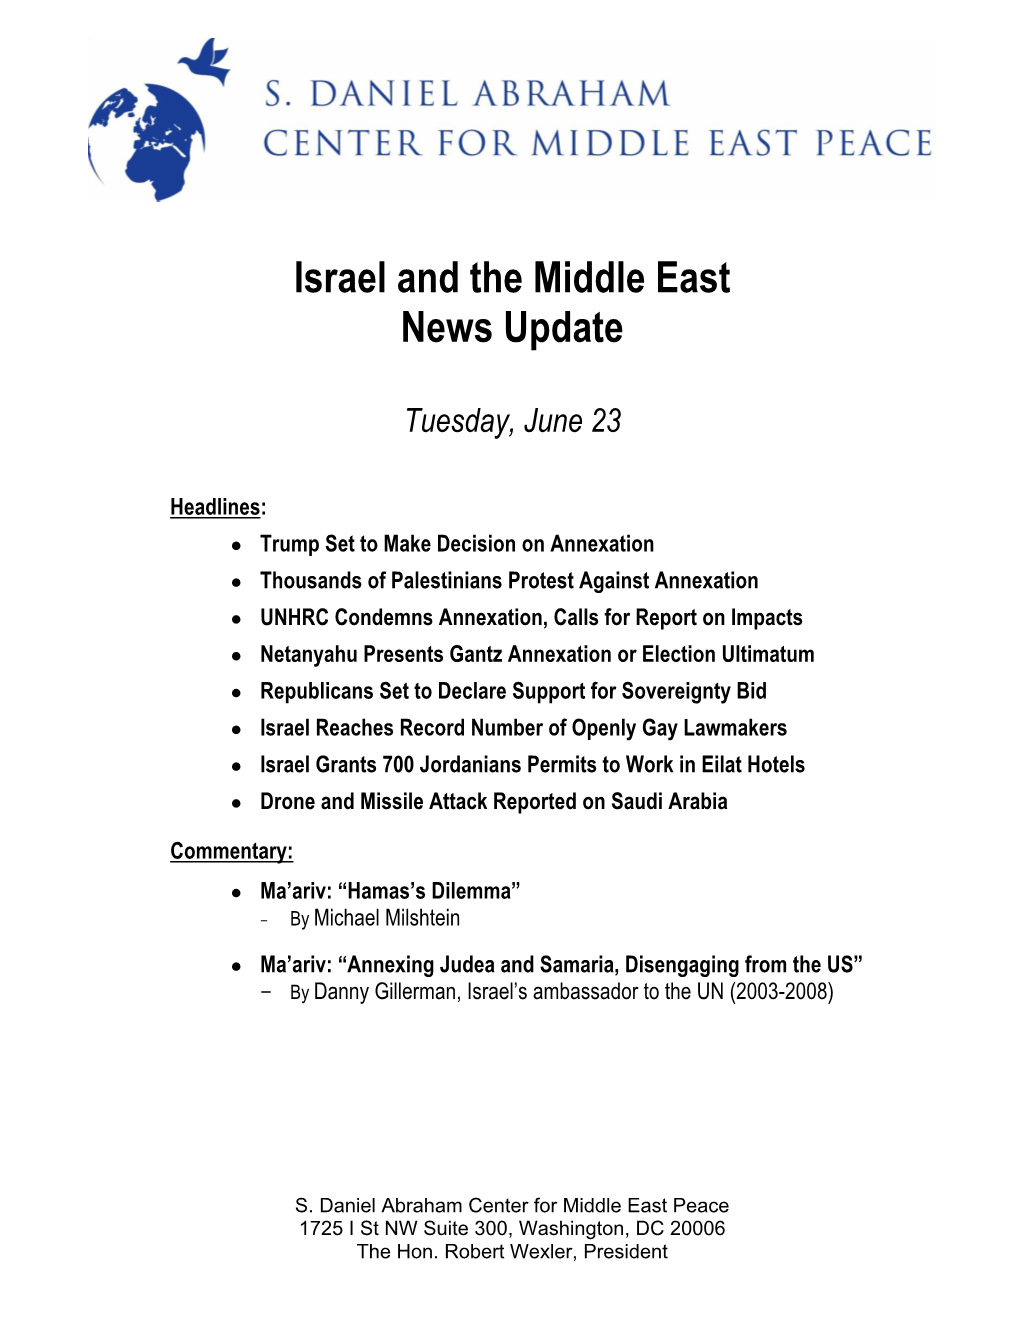 Israel and the Middle East News Update